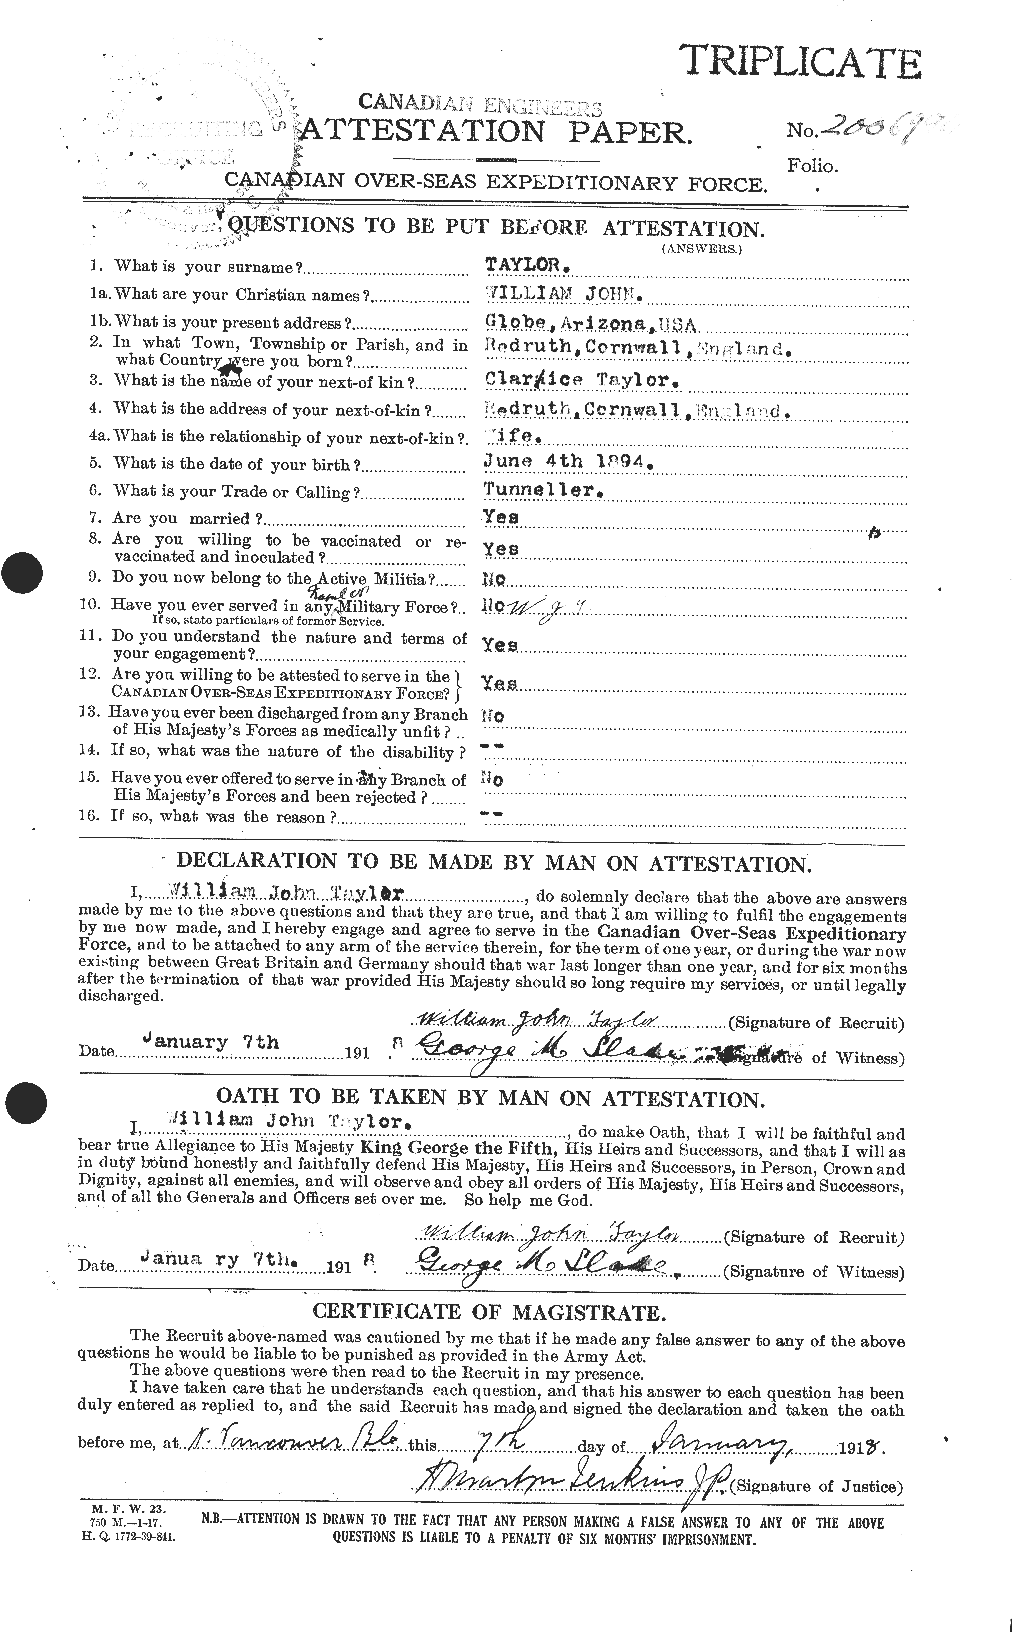 Personnel Records of the First World War - CEF 628311a